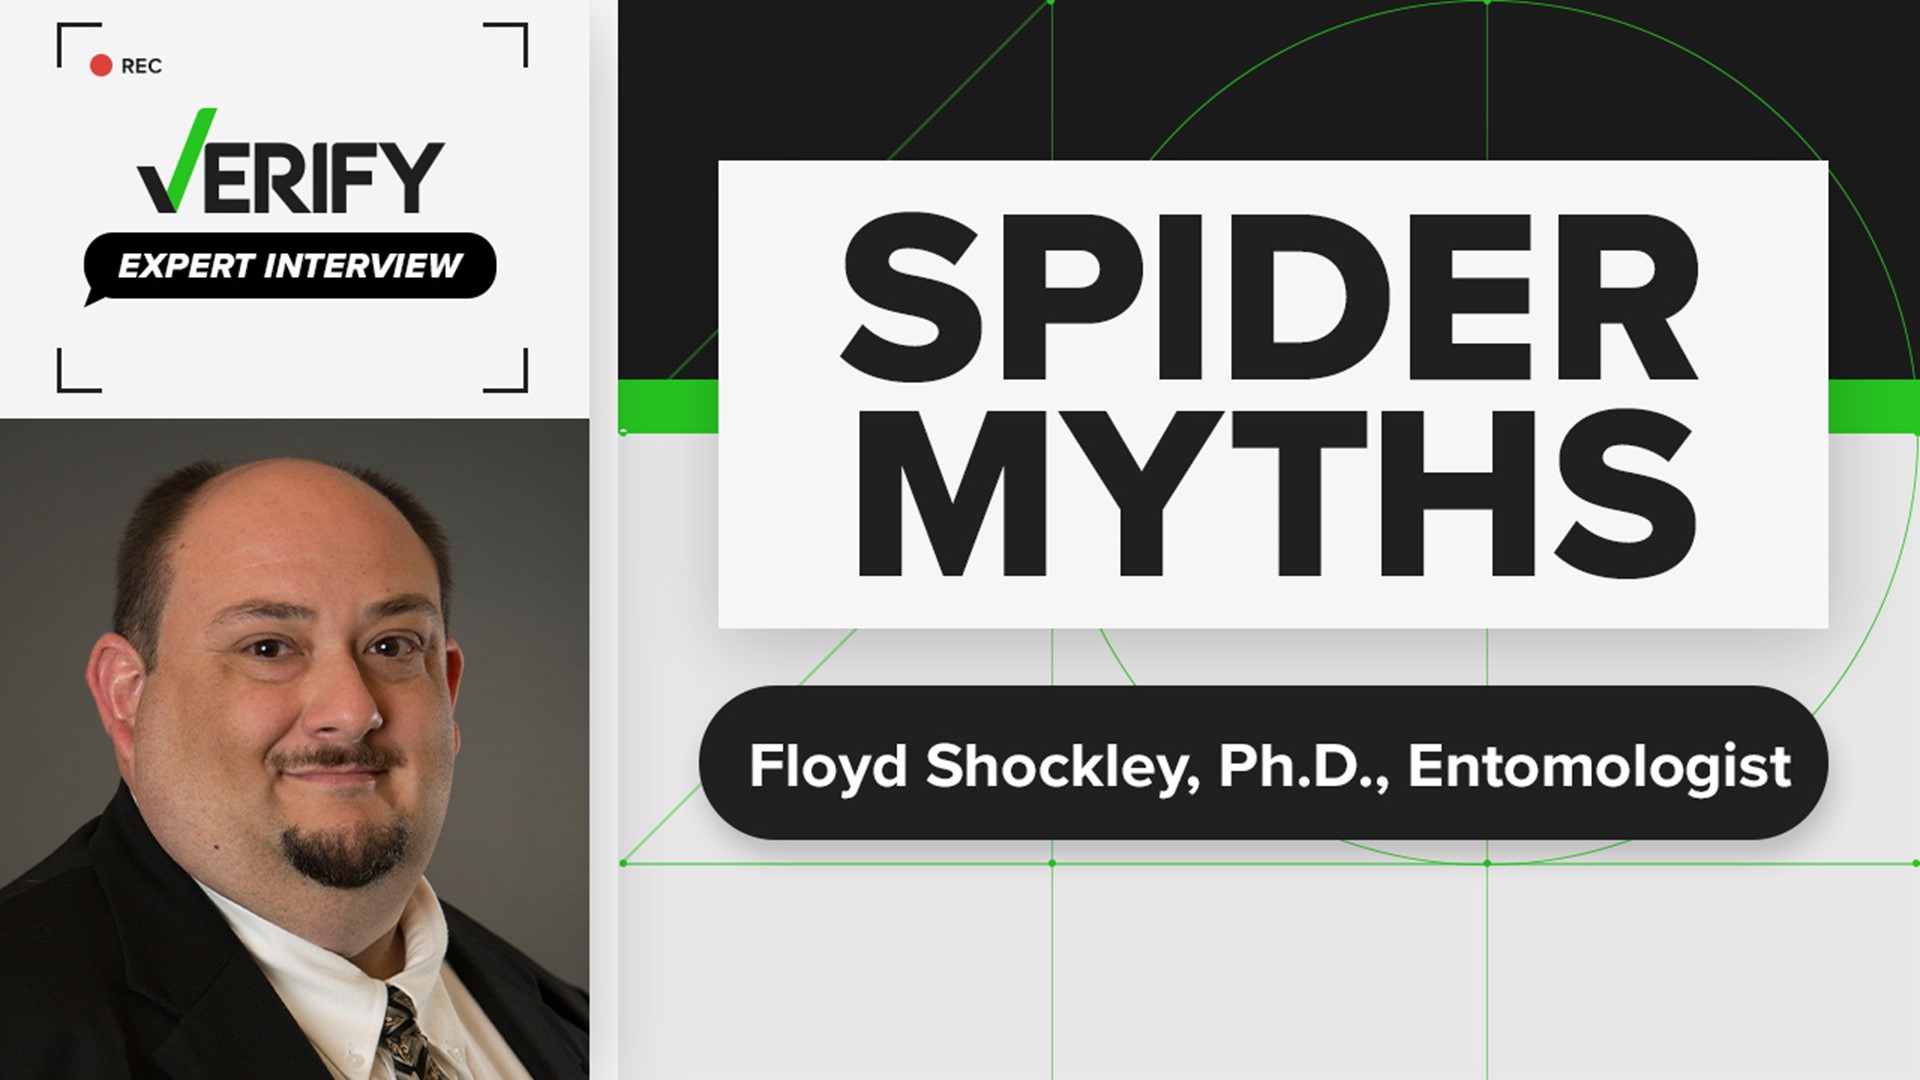 The myth of people swallowing spiders in their sleep is exactly that..a myth. Listen in on the fascinating interview with Floyd Shockley, Ph.D.